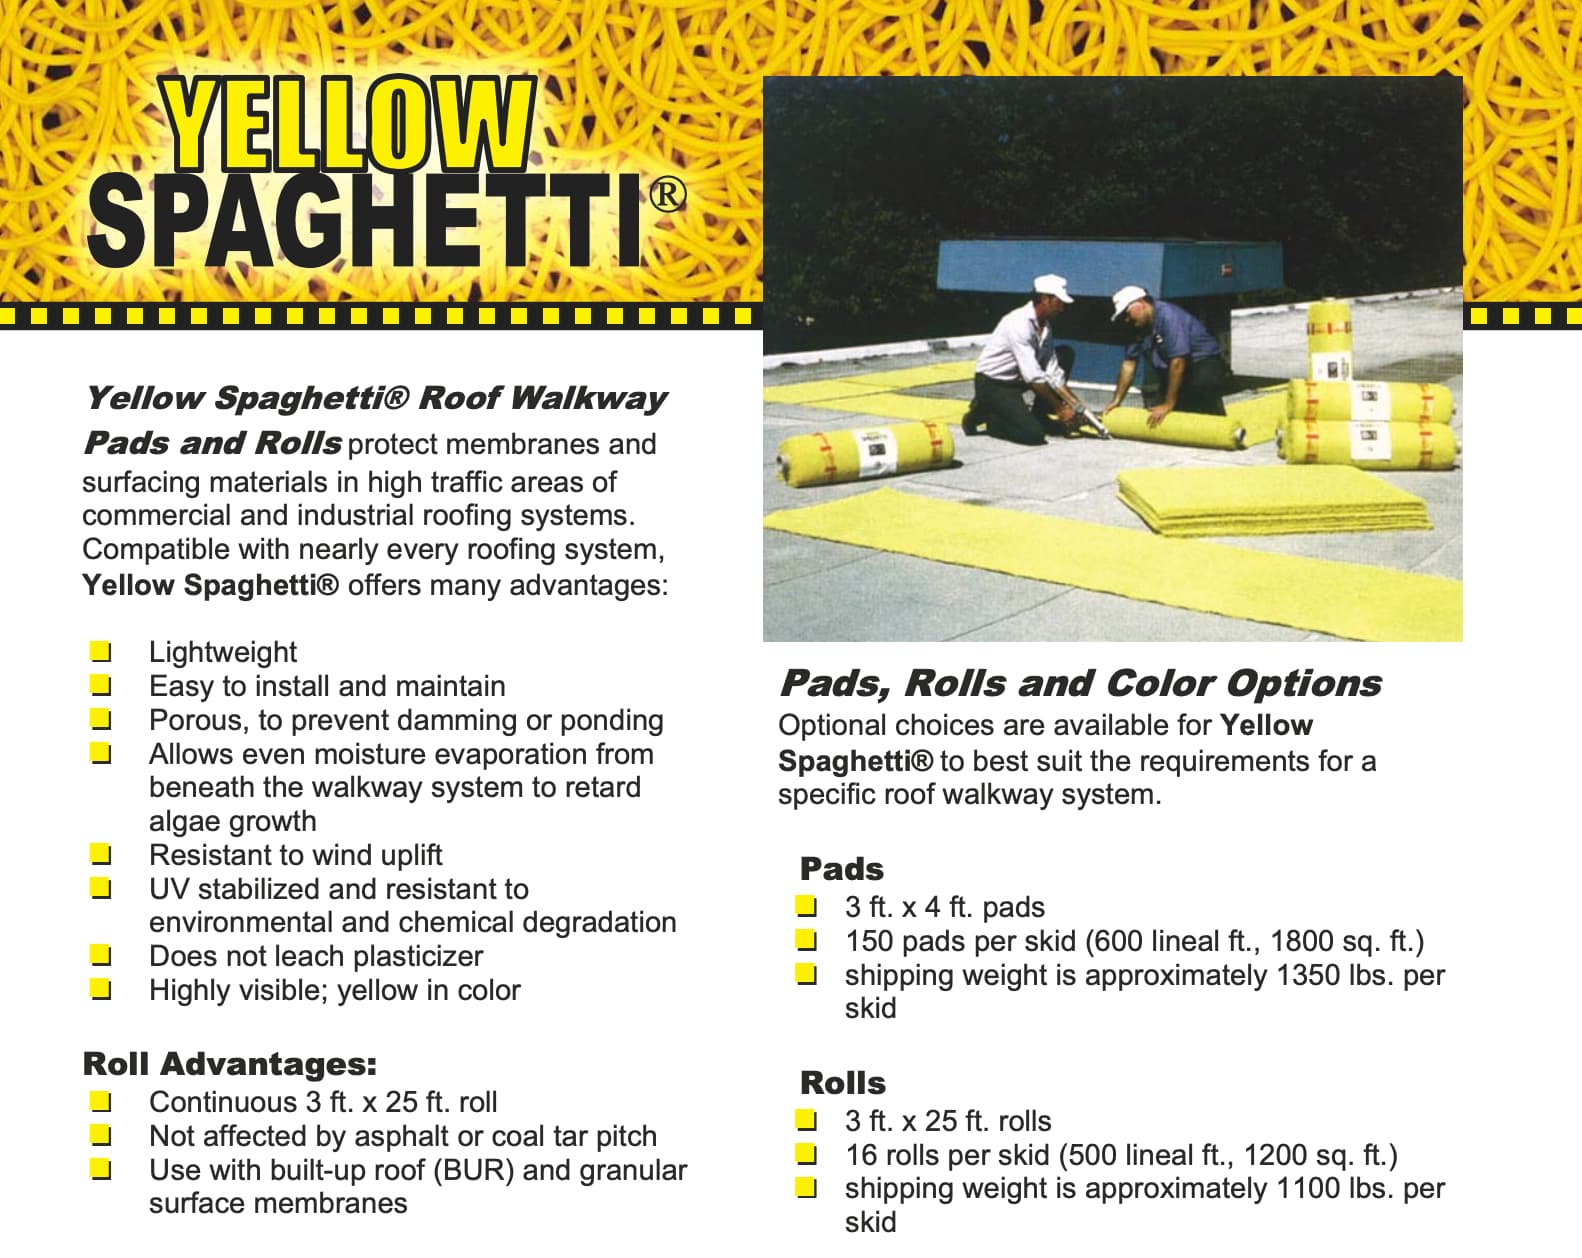 Yellow Spaghetti Roof Walkway technical information irc cover photo